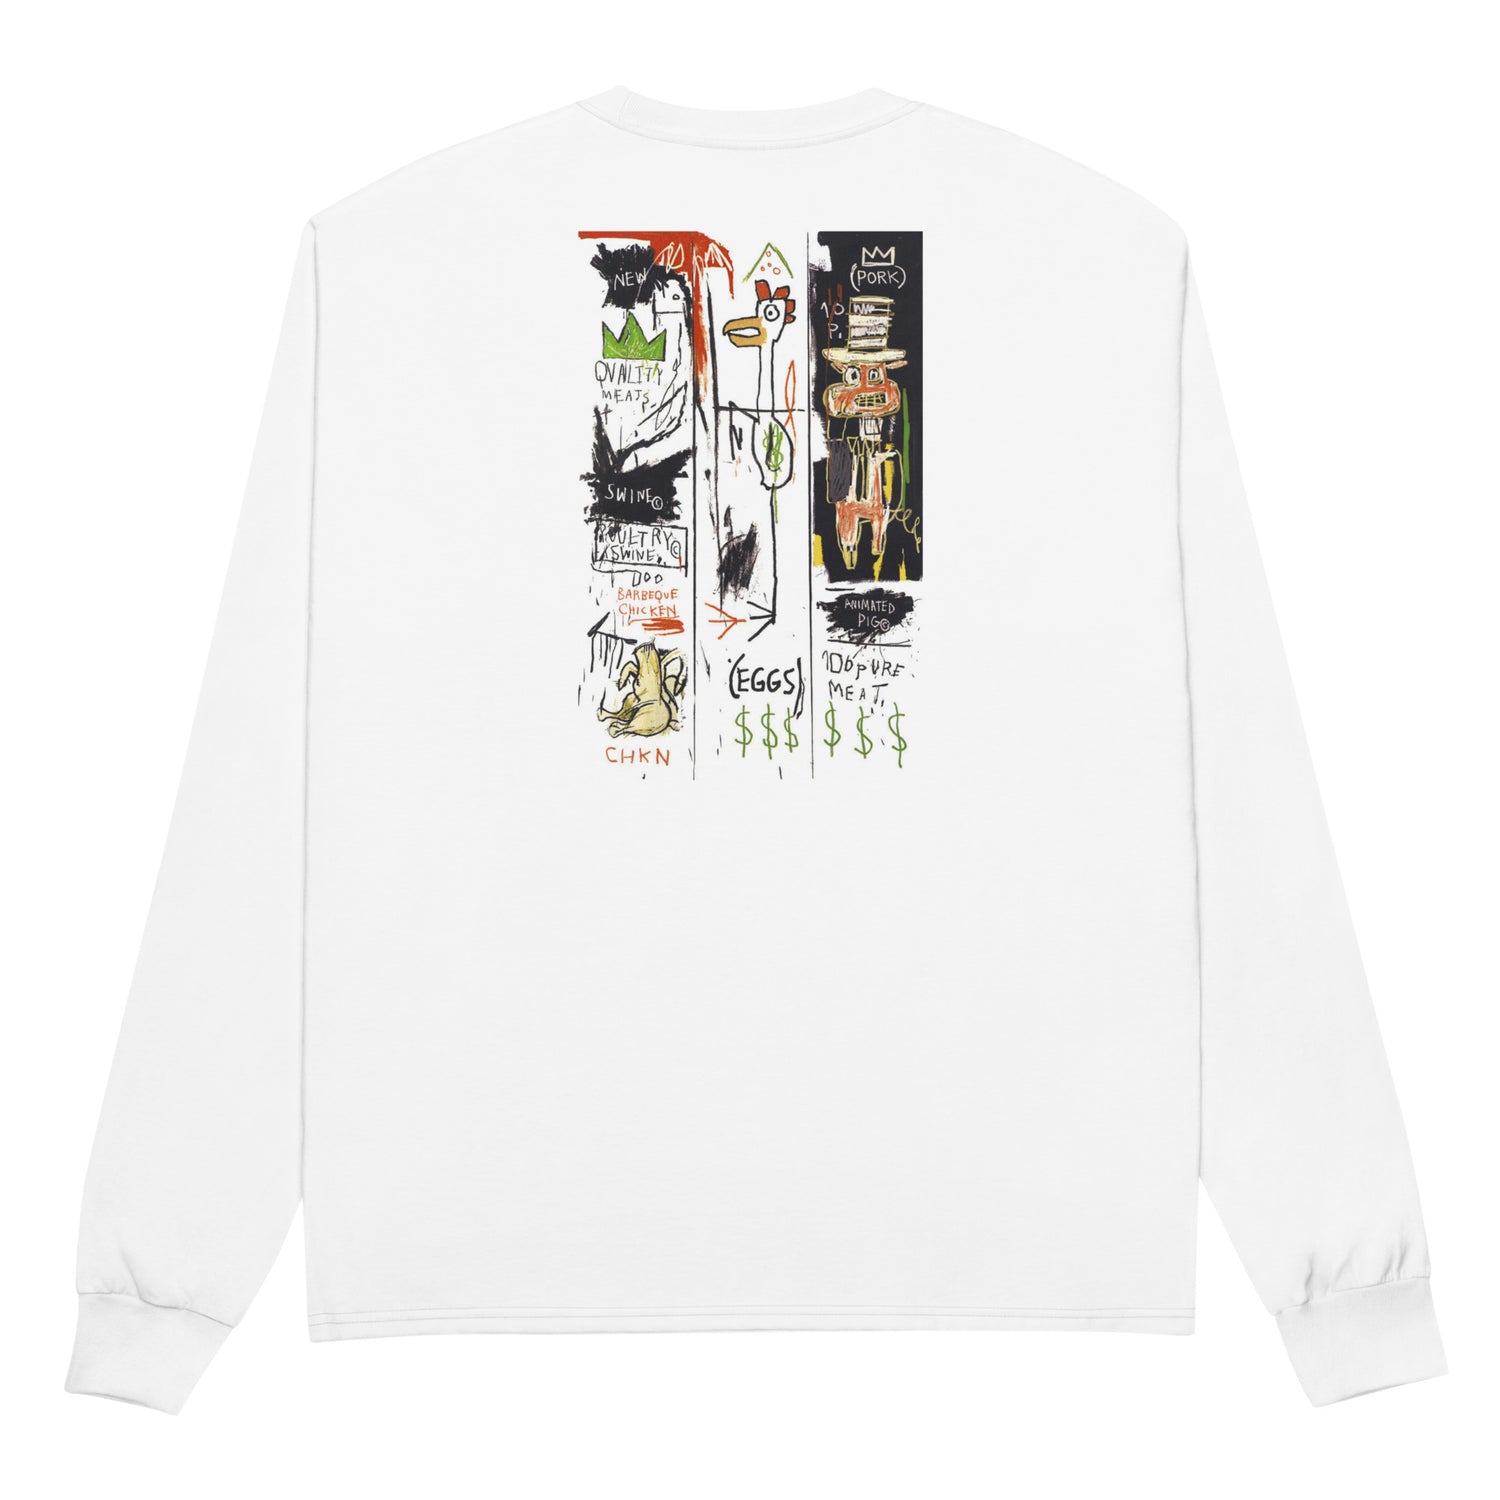 Jean-Michel Basquiat "Quality Meats for the Public" Artwork Embroidered + Printed Premium Champion Streetwear Long Sleeve Shirt White